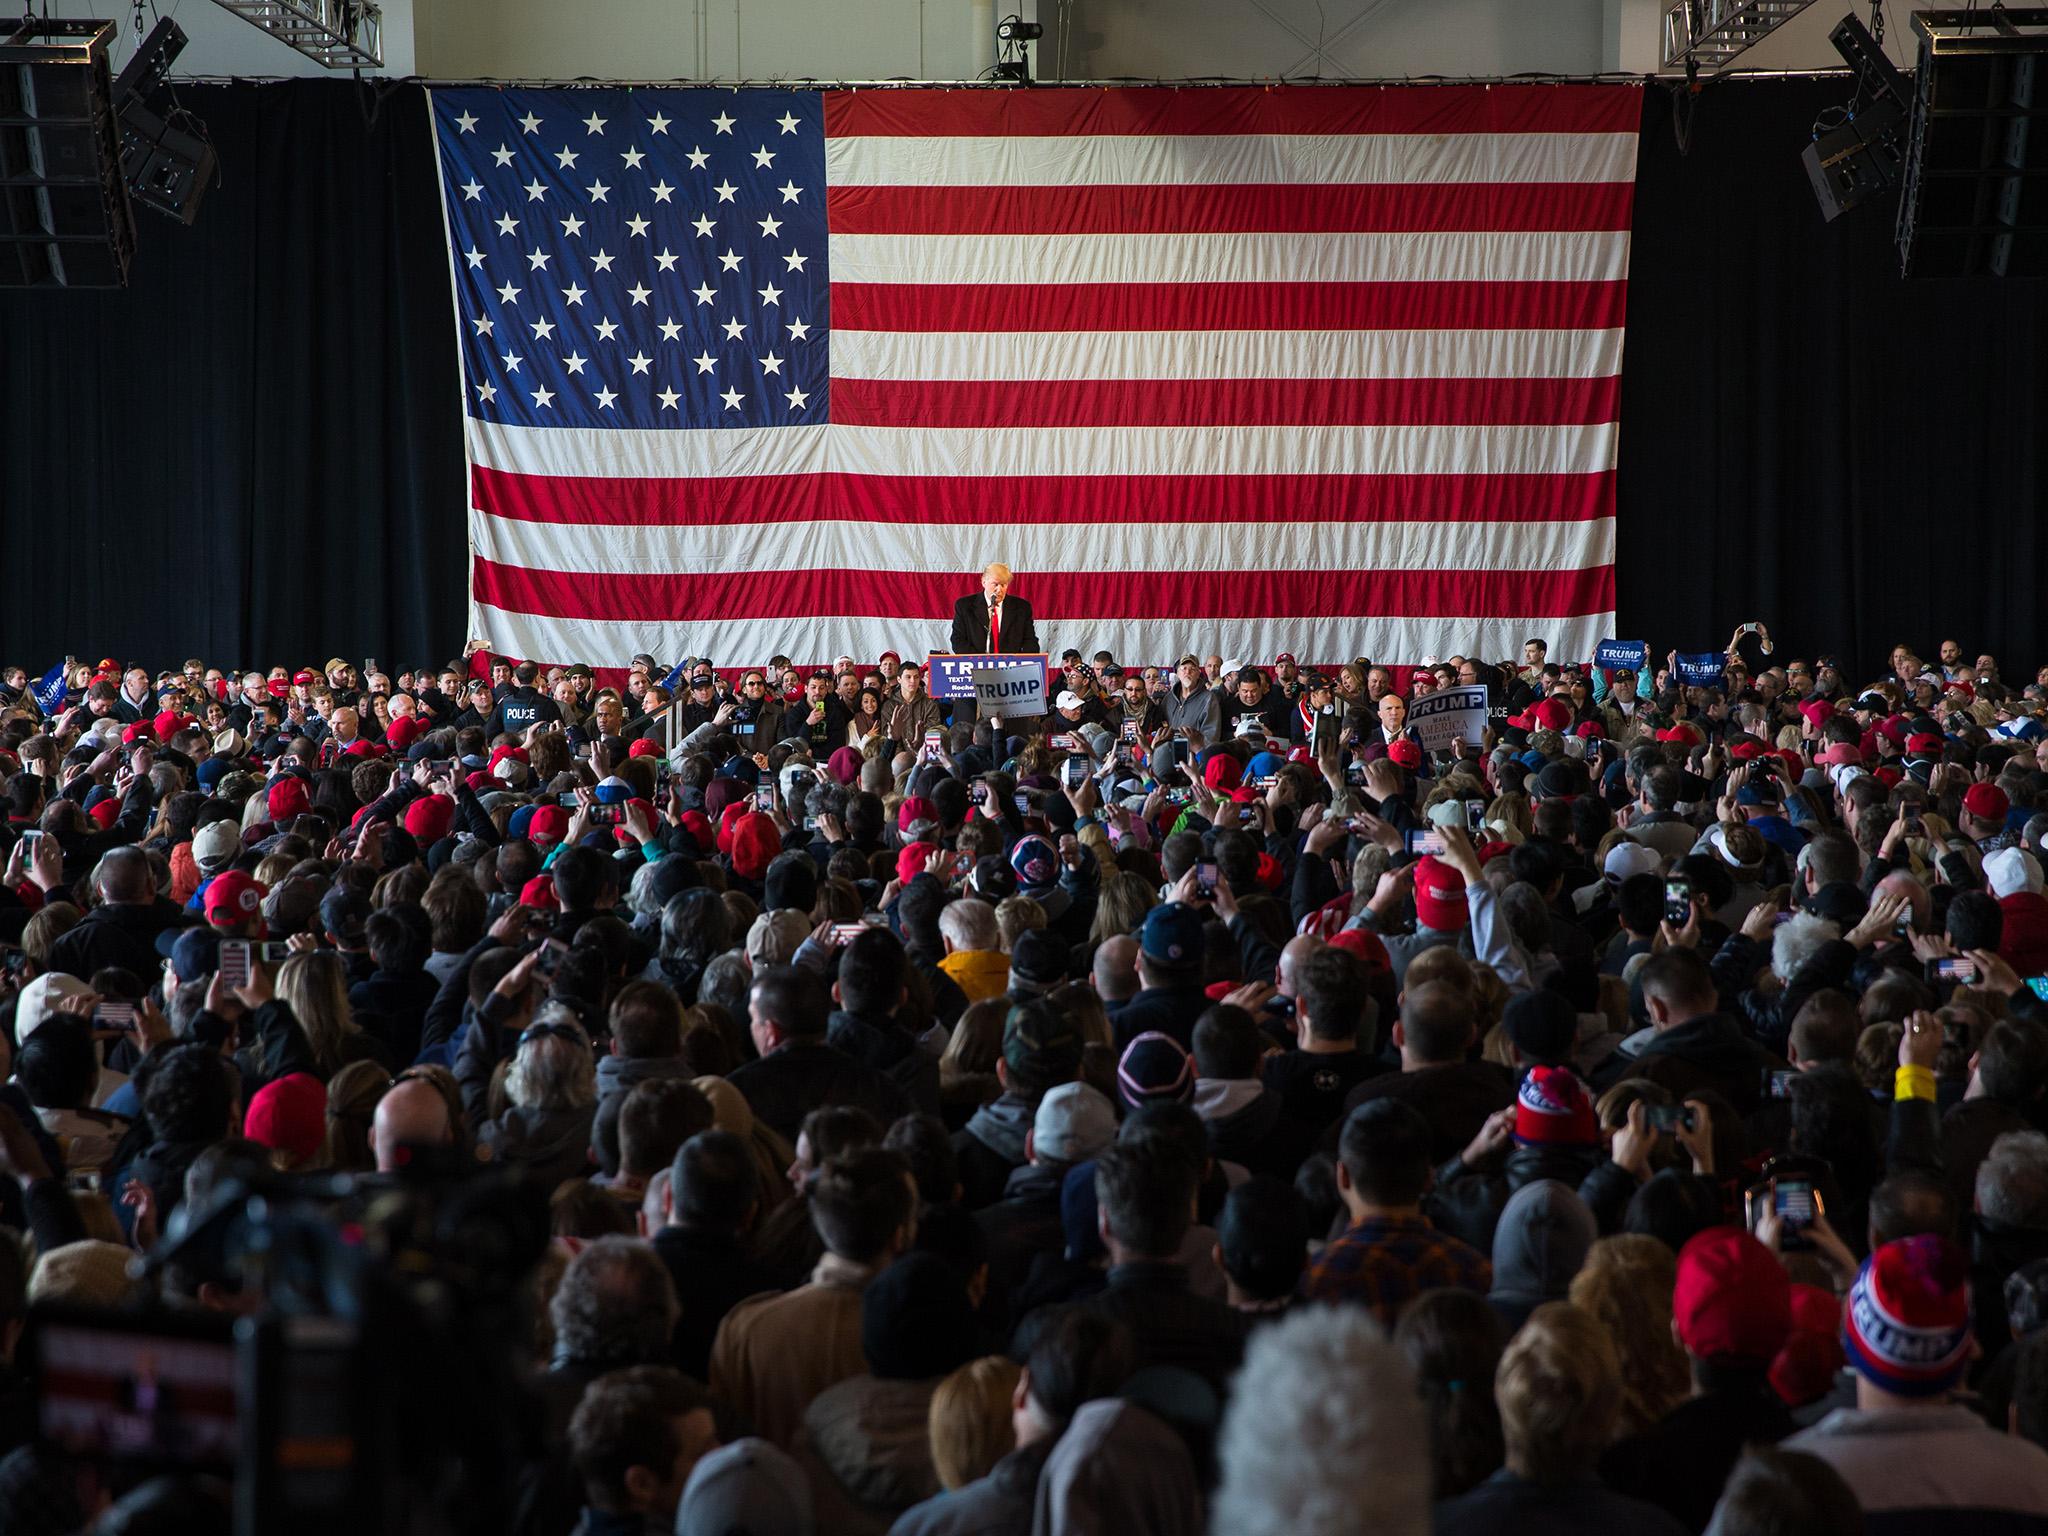 Donald Trump speaks in front of a capacity crowd at a rally for his campaign in Rochester, New York